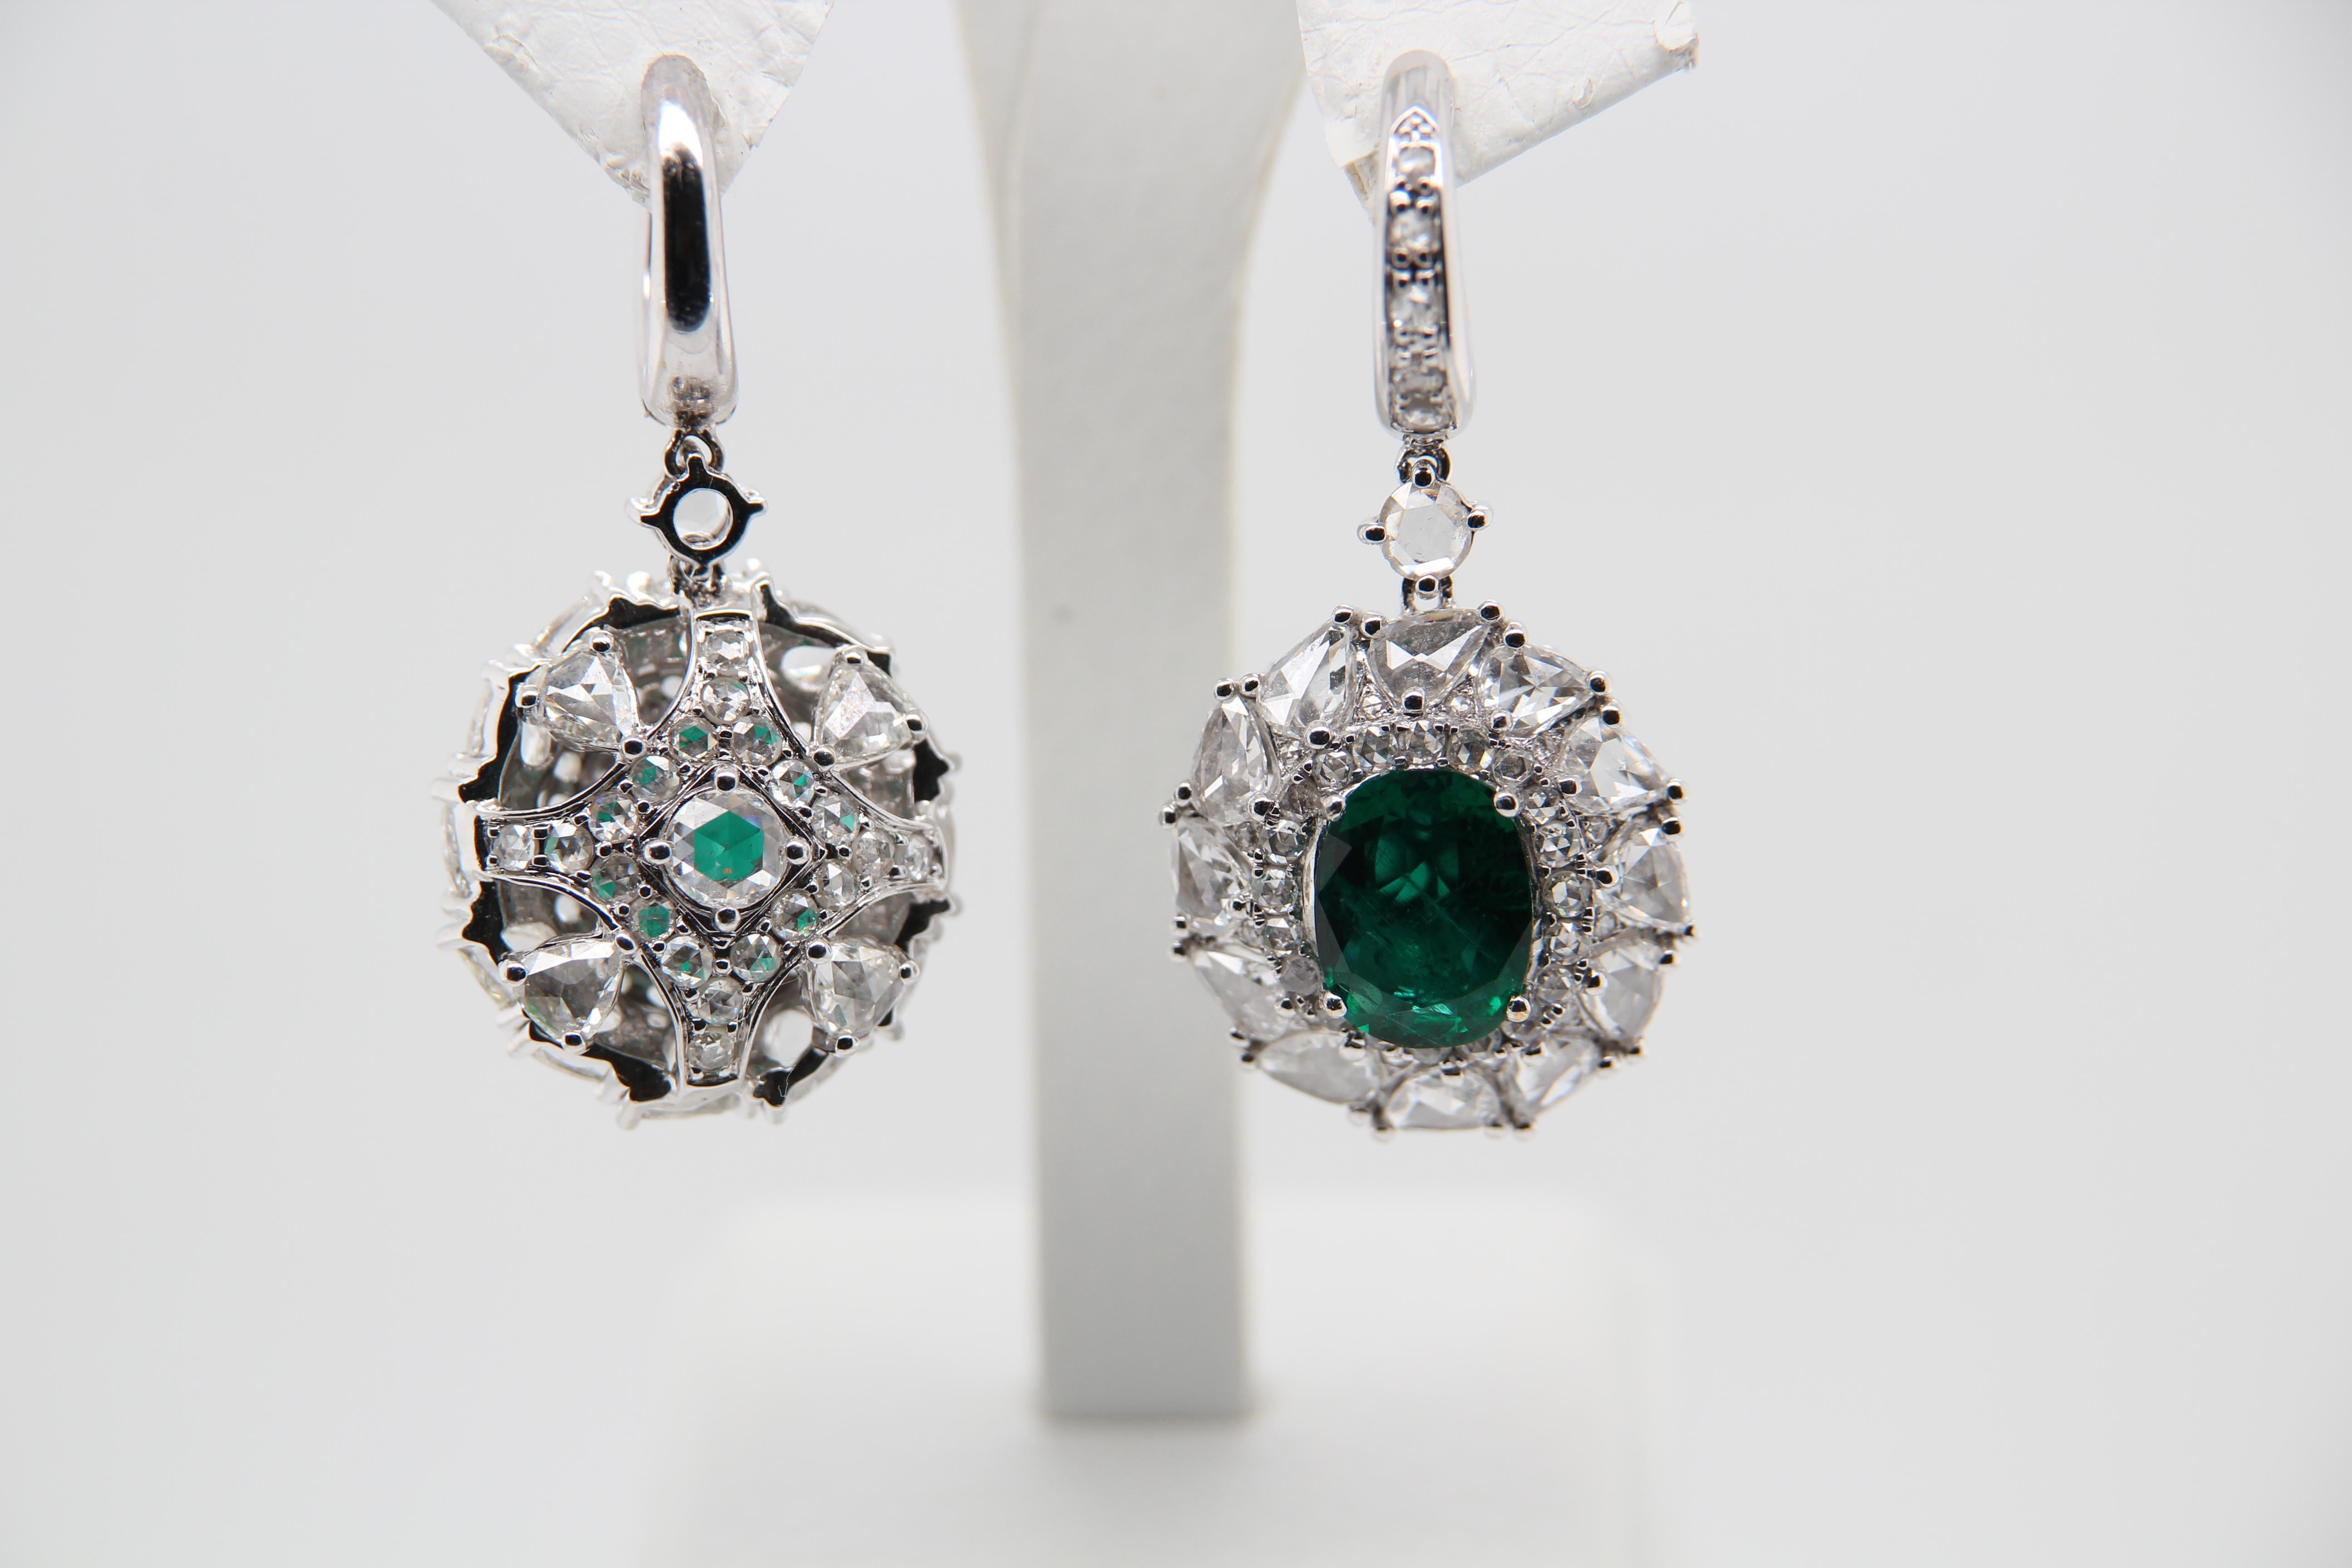 An emerald earring pair. Oval shaped Zambian Emeralds with insignificant oil weighing 2.79 Carat and 3.08 Carat individually and diamonds weighing 8.48 Carat. Made in 18k white gold 21.68 g gross weight.